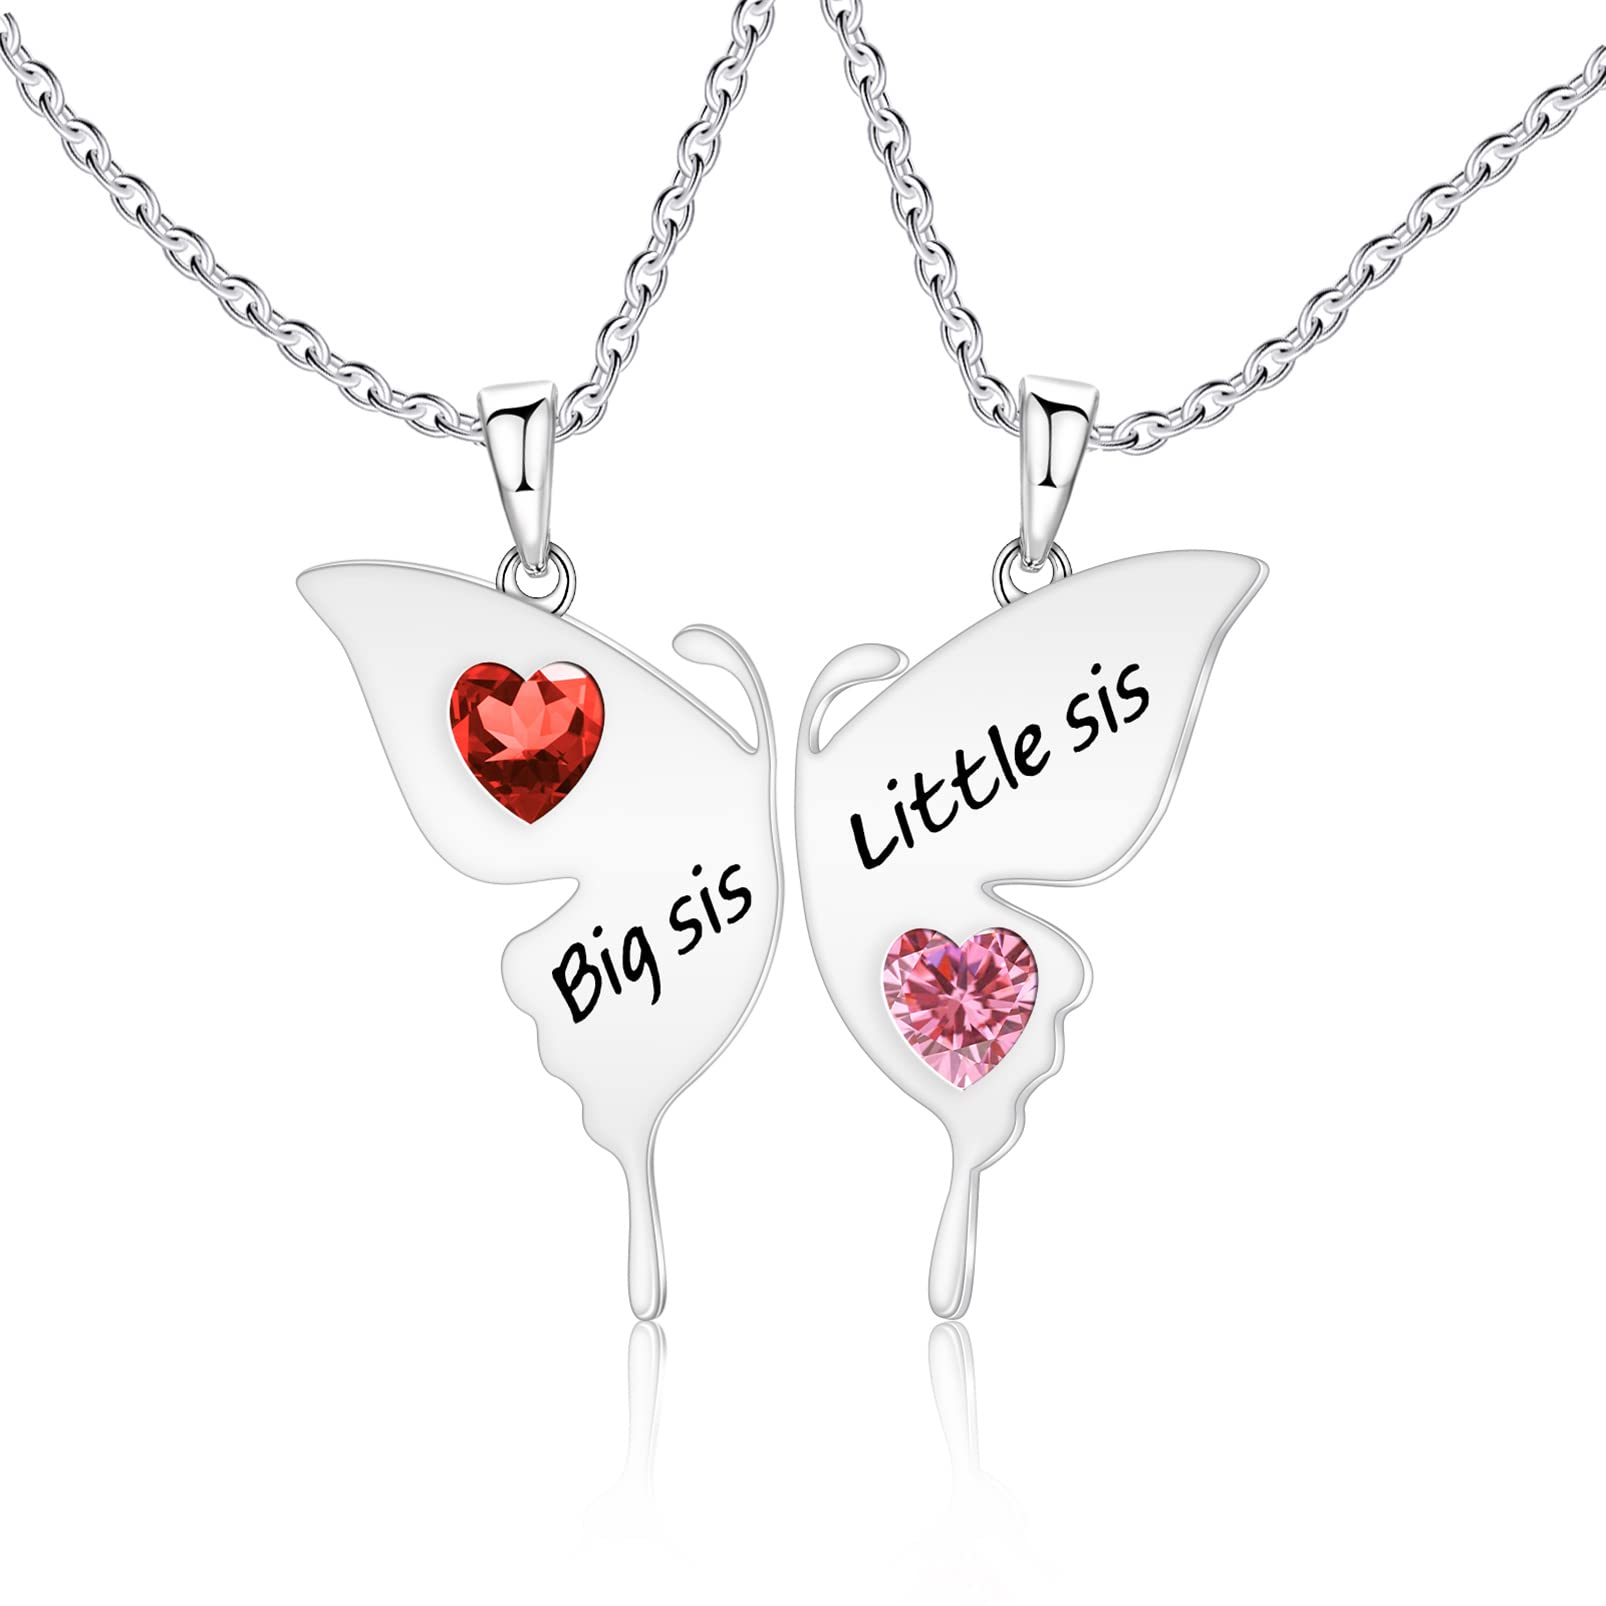 Personalized Butterfly Birthstone Necklace Set for BFF-YITUB